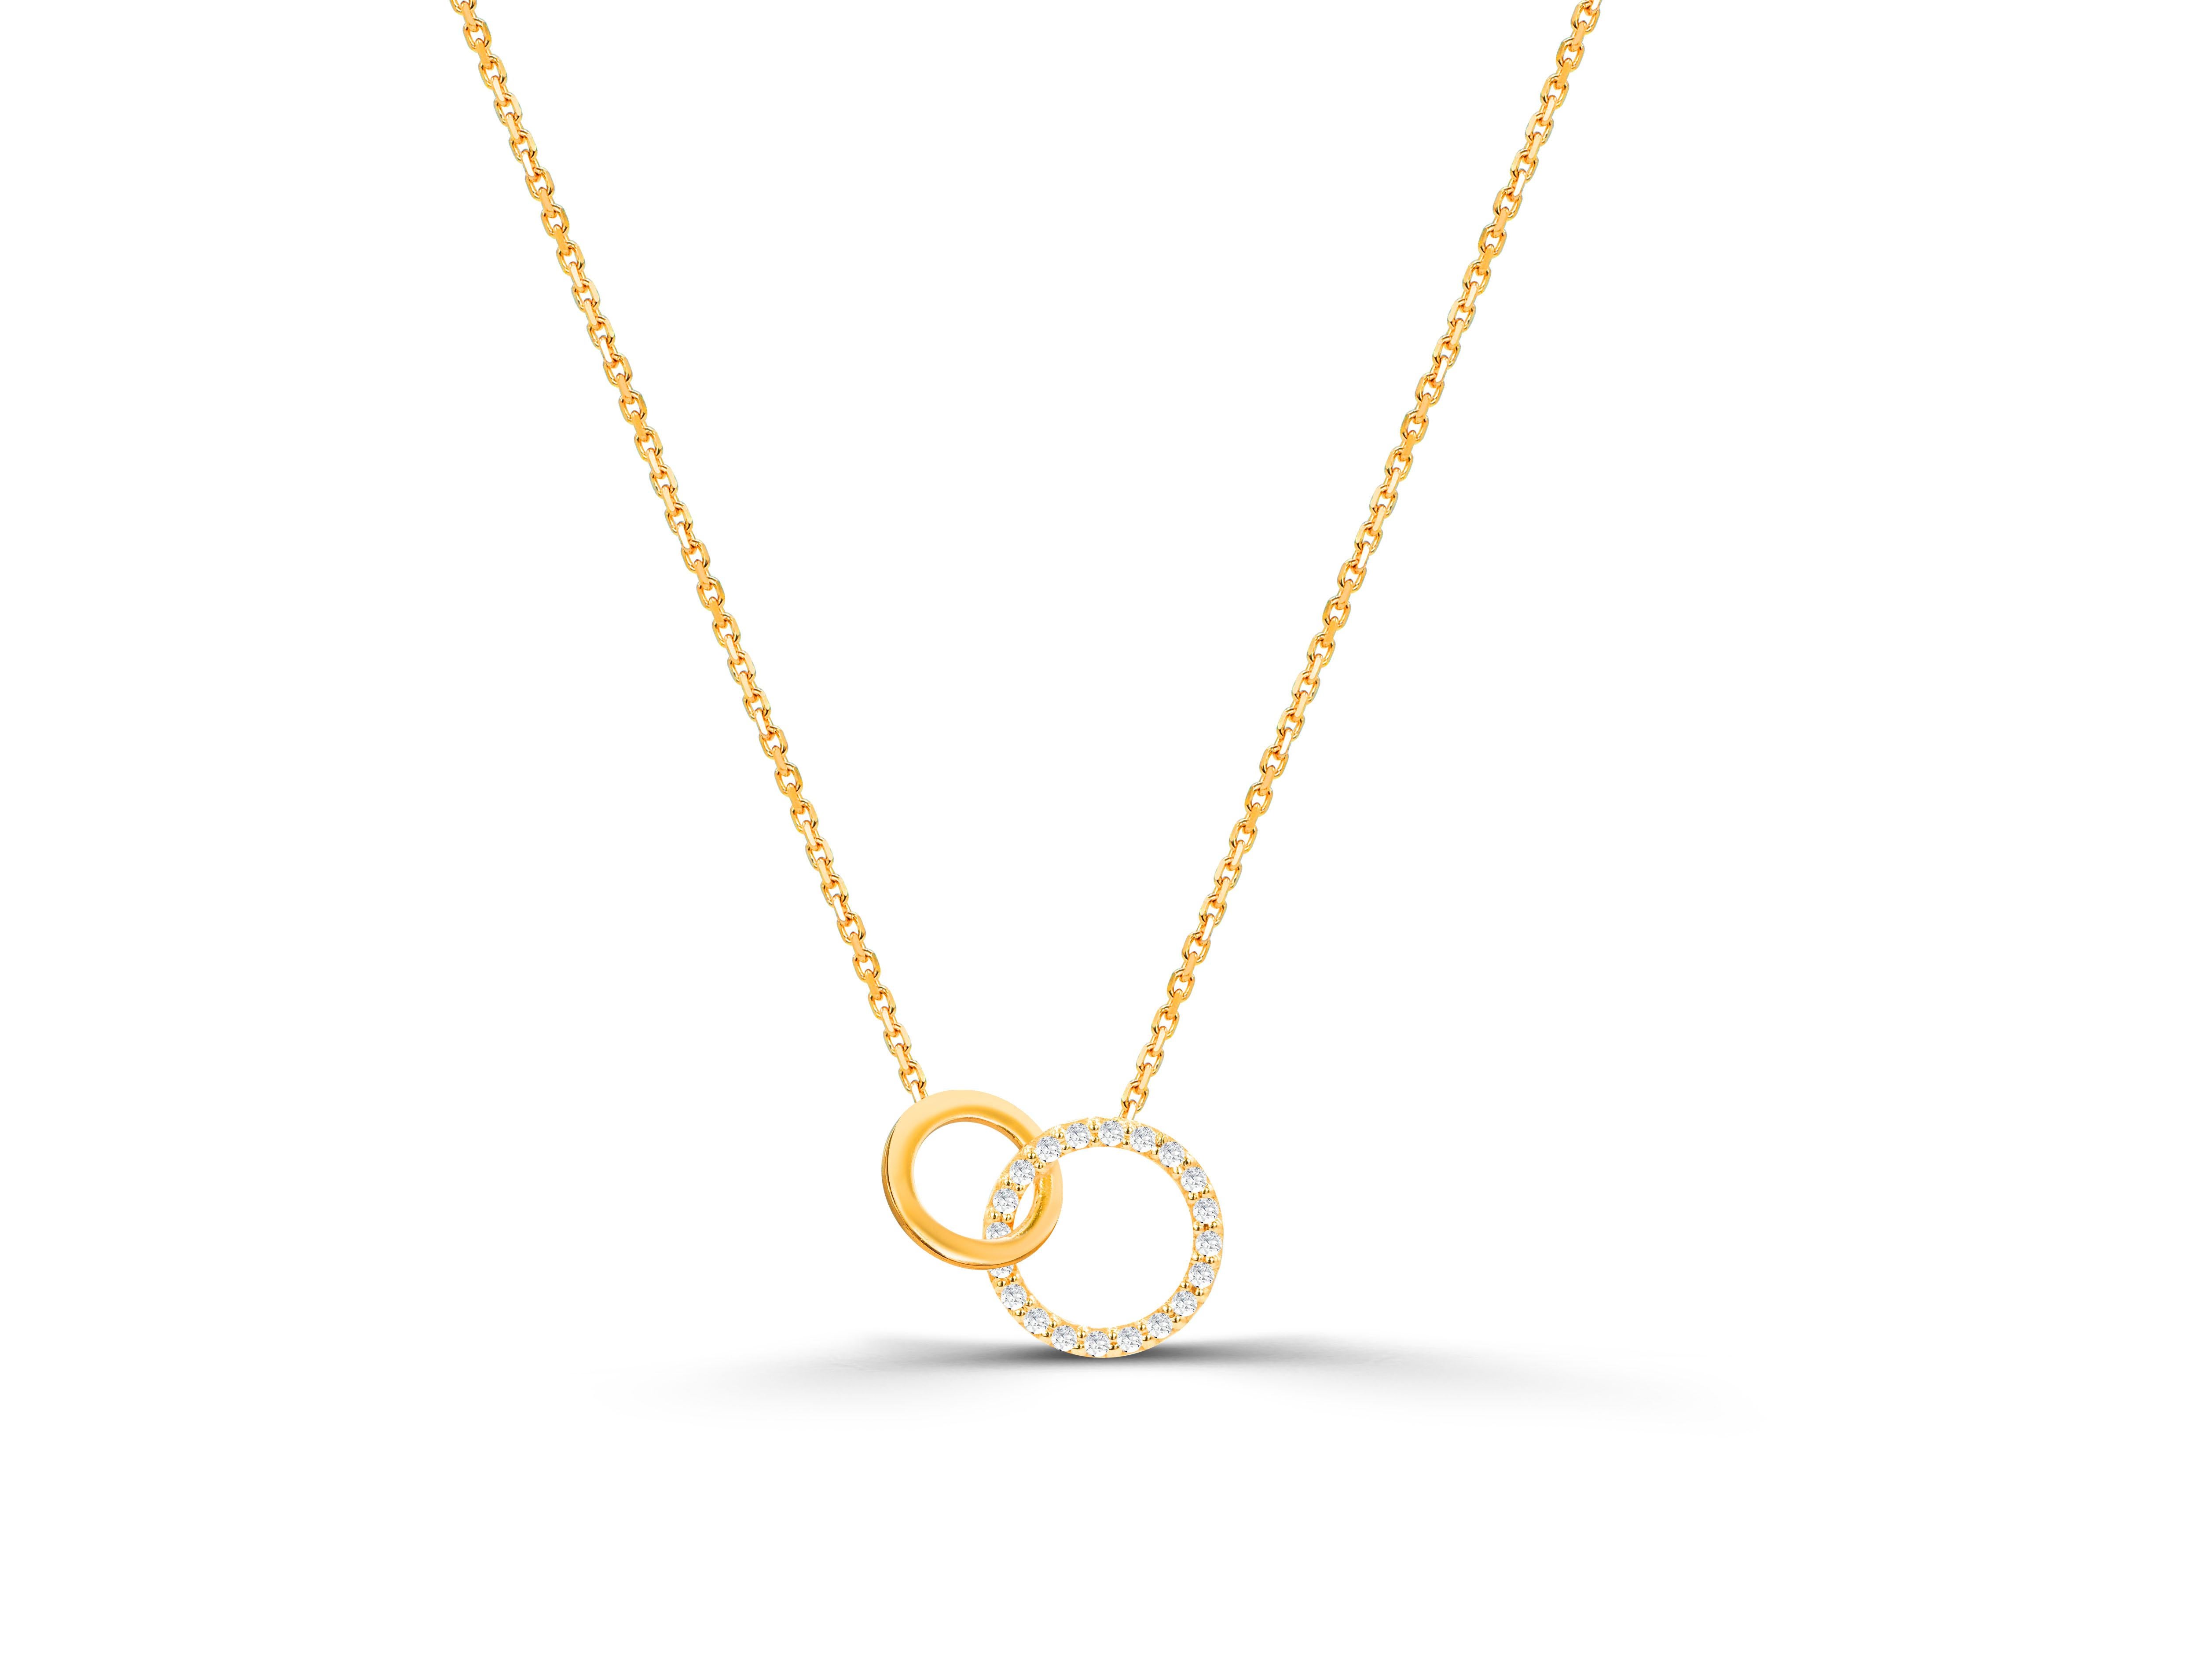 Dainty interlocking two circle  diamond necklace, Eternity circle necklace / Gifts for her

Eternity circle, 2 circle necklace, Handmade jewelry, Bridesmaid gifts, Diamond necklace, christmas gift, gifts for women, gold necklace, ring necklace,